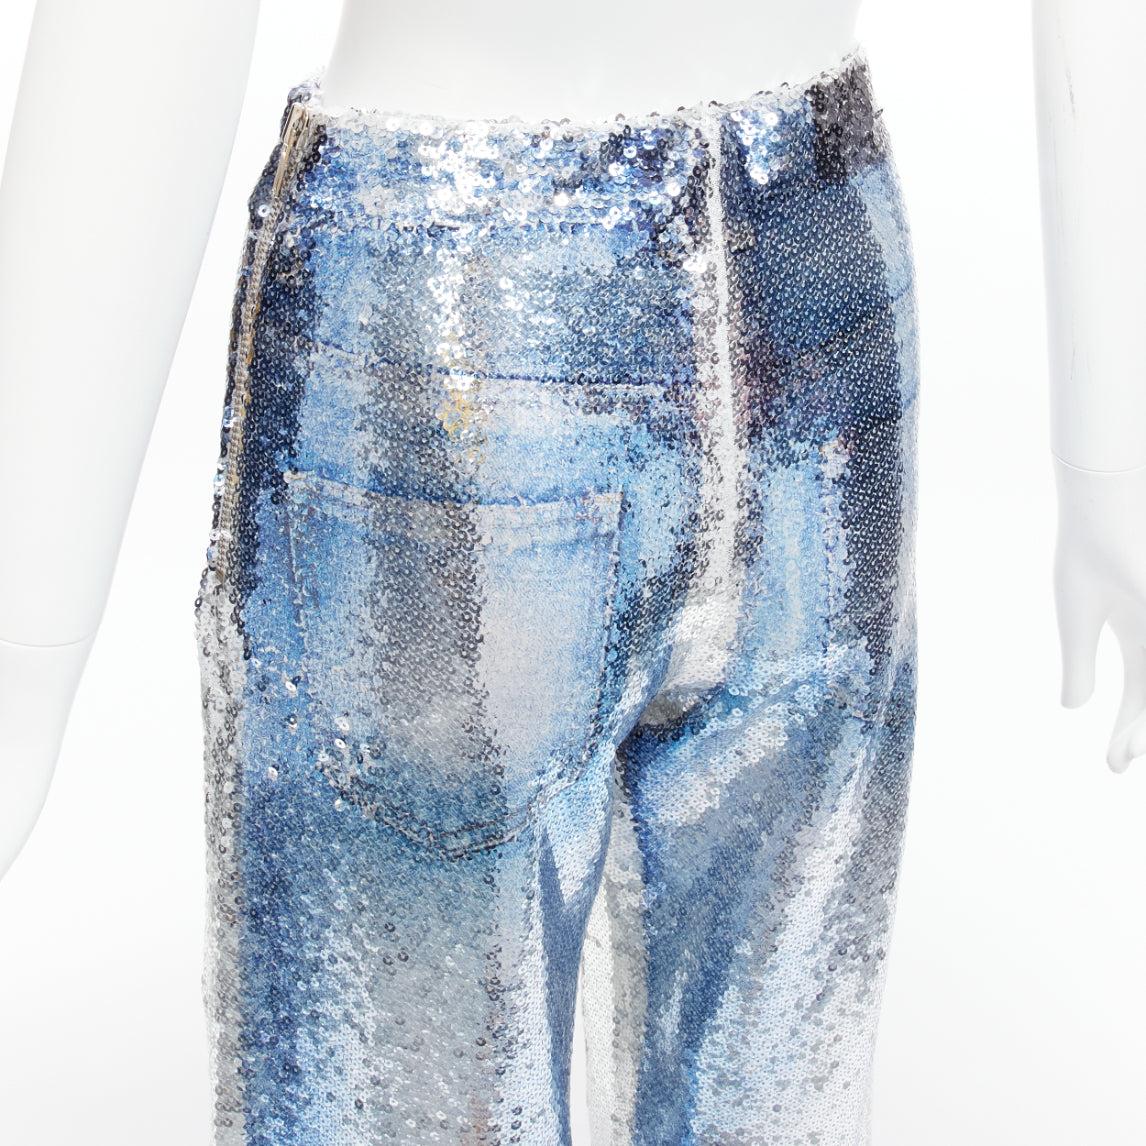 PONY STONE THAILAND silver blue tromp loeil jeans print sequins wide leg pants US2 S
Reference: BSHW/A00054
Brand: Pony Stone
Material: Polyester
Color: Blue, Silver
Pattern: Sequins
Closure: Zip Fly
Lining: White Fabric
Extra Details: Side